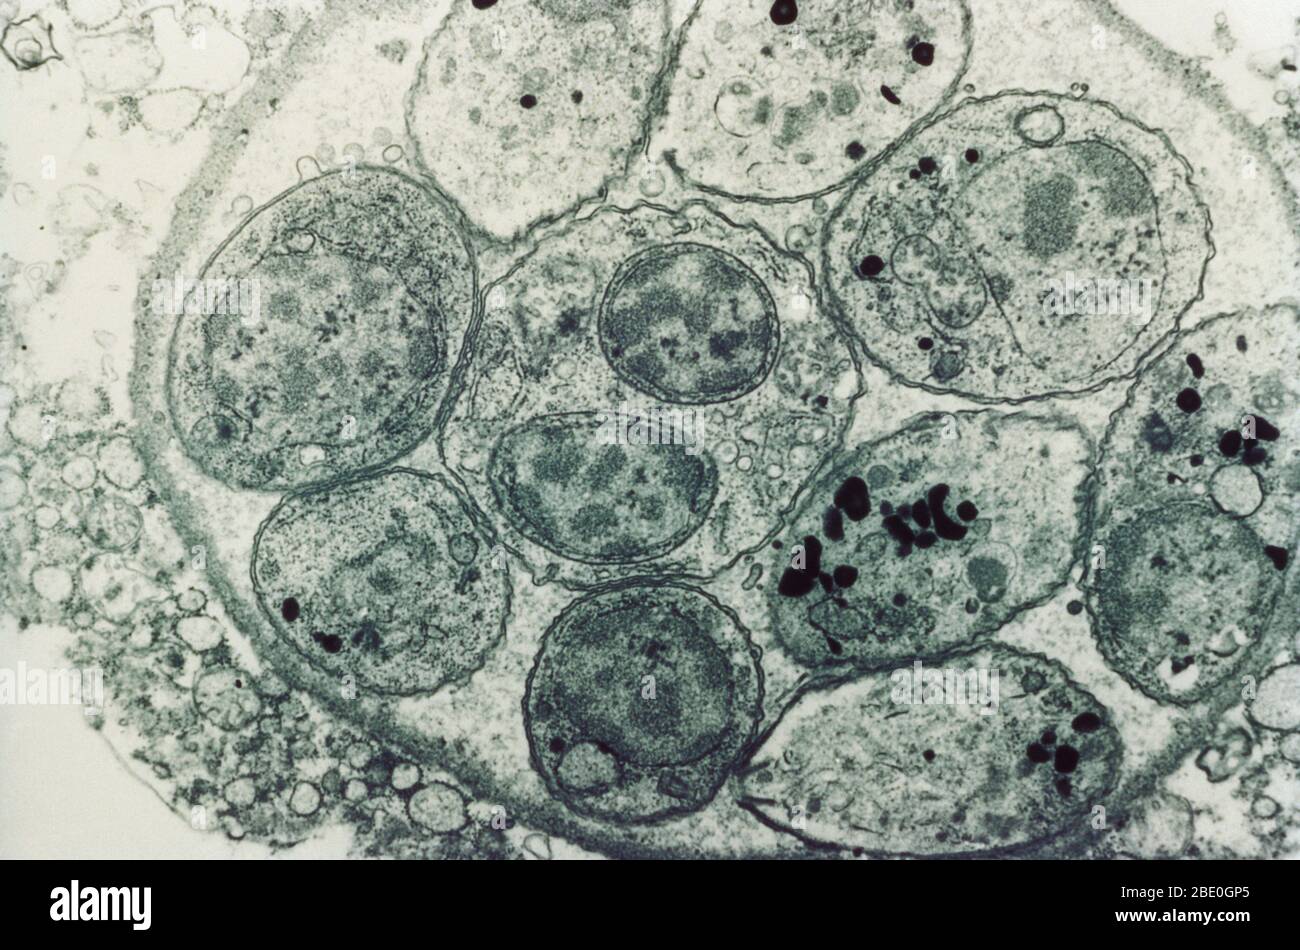 Transmission Electron Micrograph (TEM) showing Toxoplasma cyst. Toxoplasma is a parasitic protozoan that causes the disease Toxoplasmosis. Magnification unknown. Stock Photo